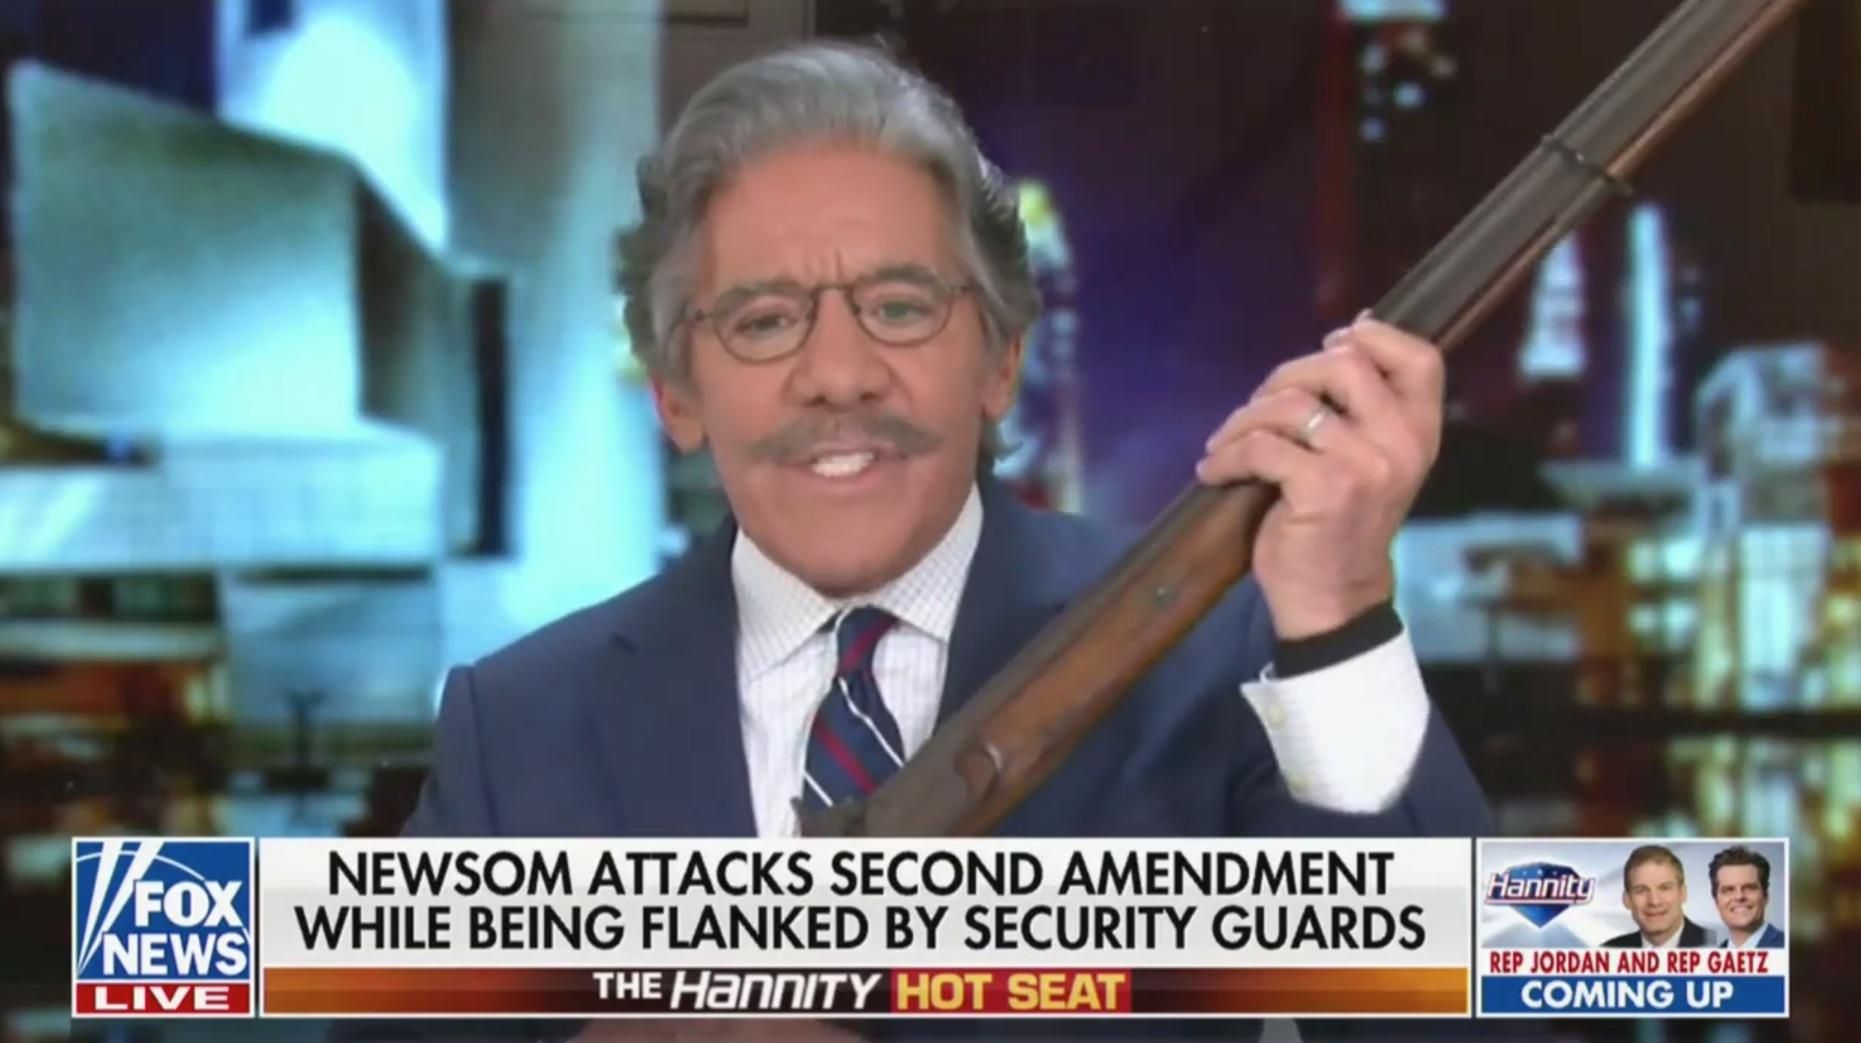 ‘Very cute’: Mockery ensues when Geraldo Rivera whips out musket to make point about Second Amendment